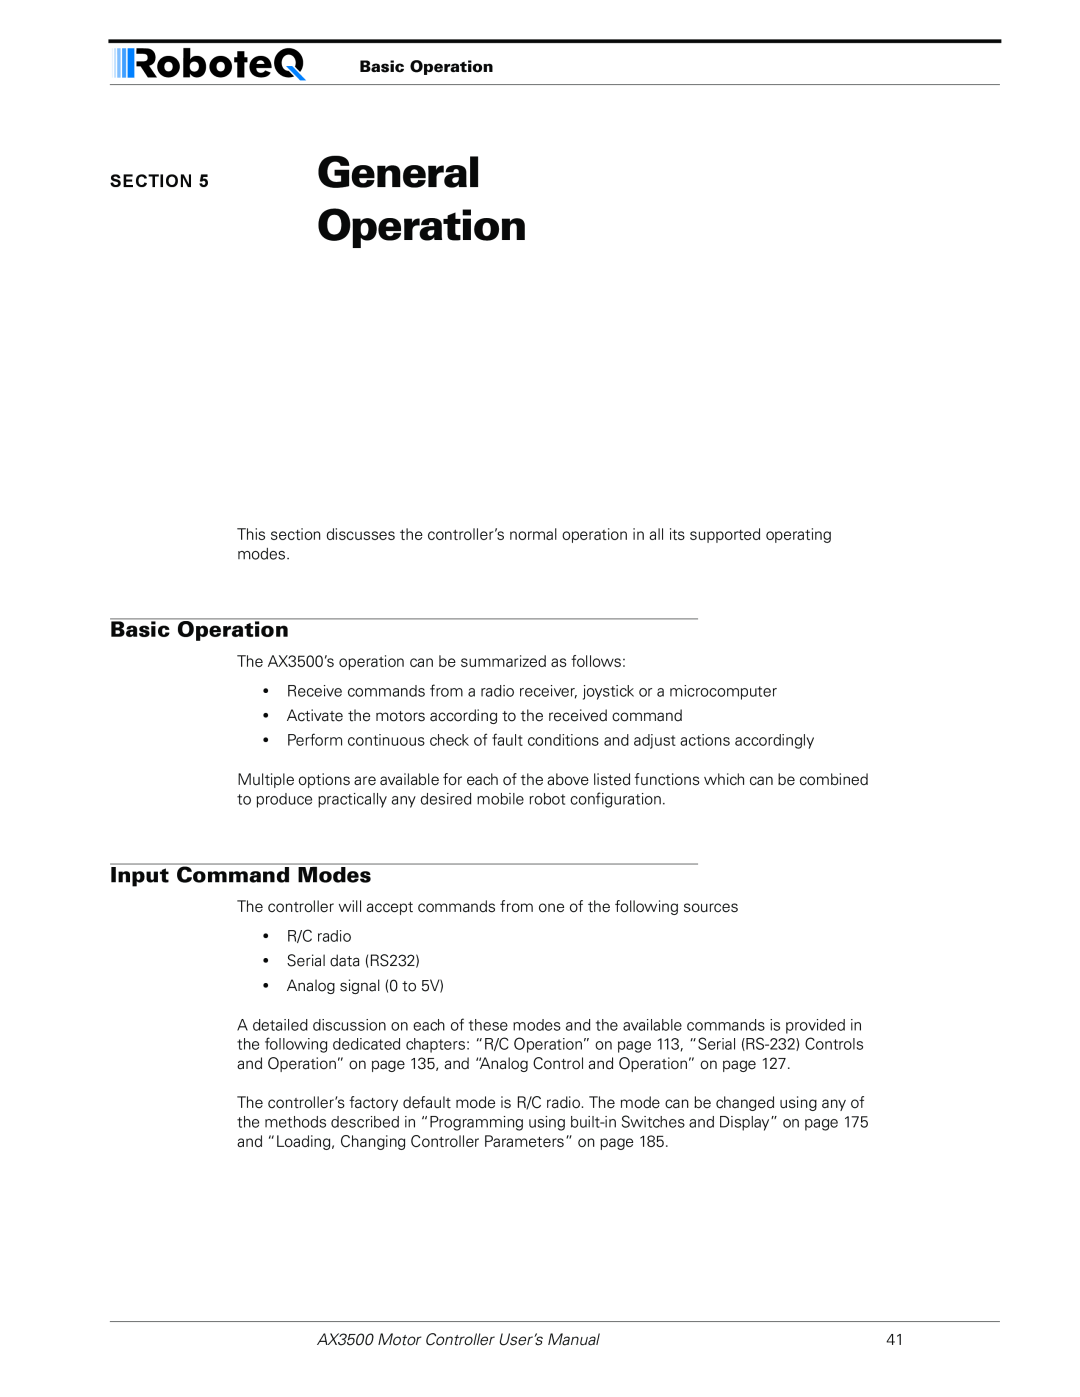 RoboteQ user manual General Operation, Basic Operation, Input Command Modes, AX3500 Motor Controller User’s Manual 